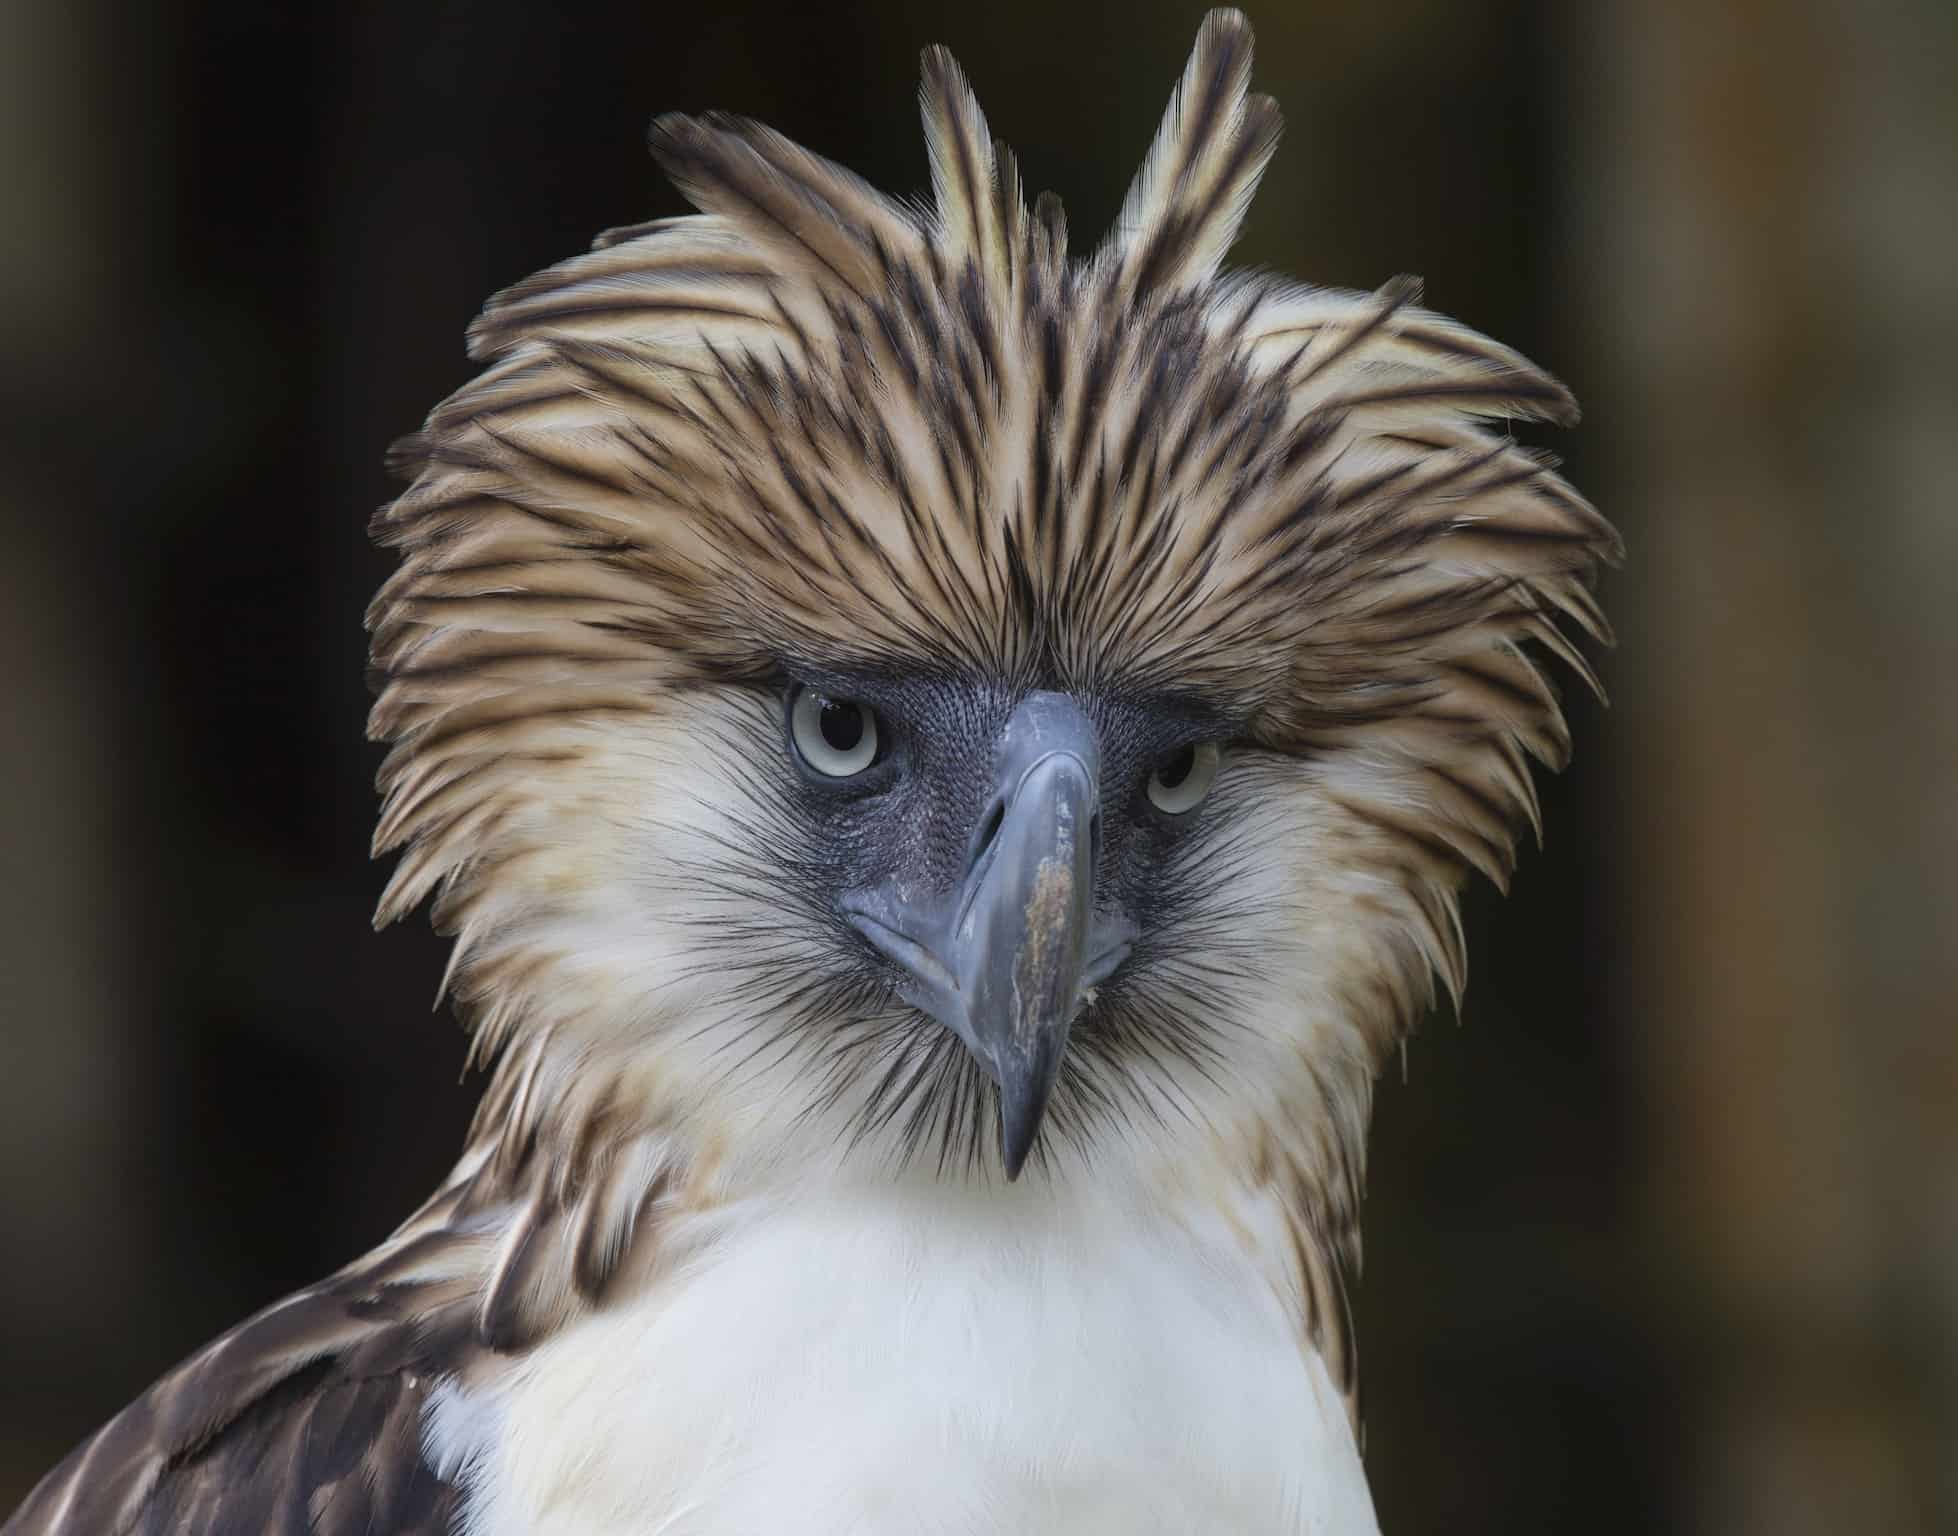 Pandemic or not, the mission to save the rare Philippine eagle grinds on